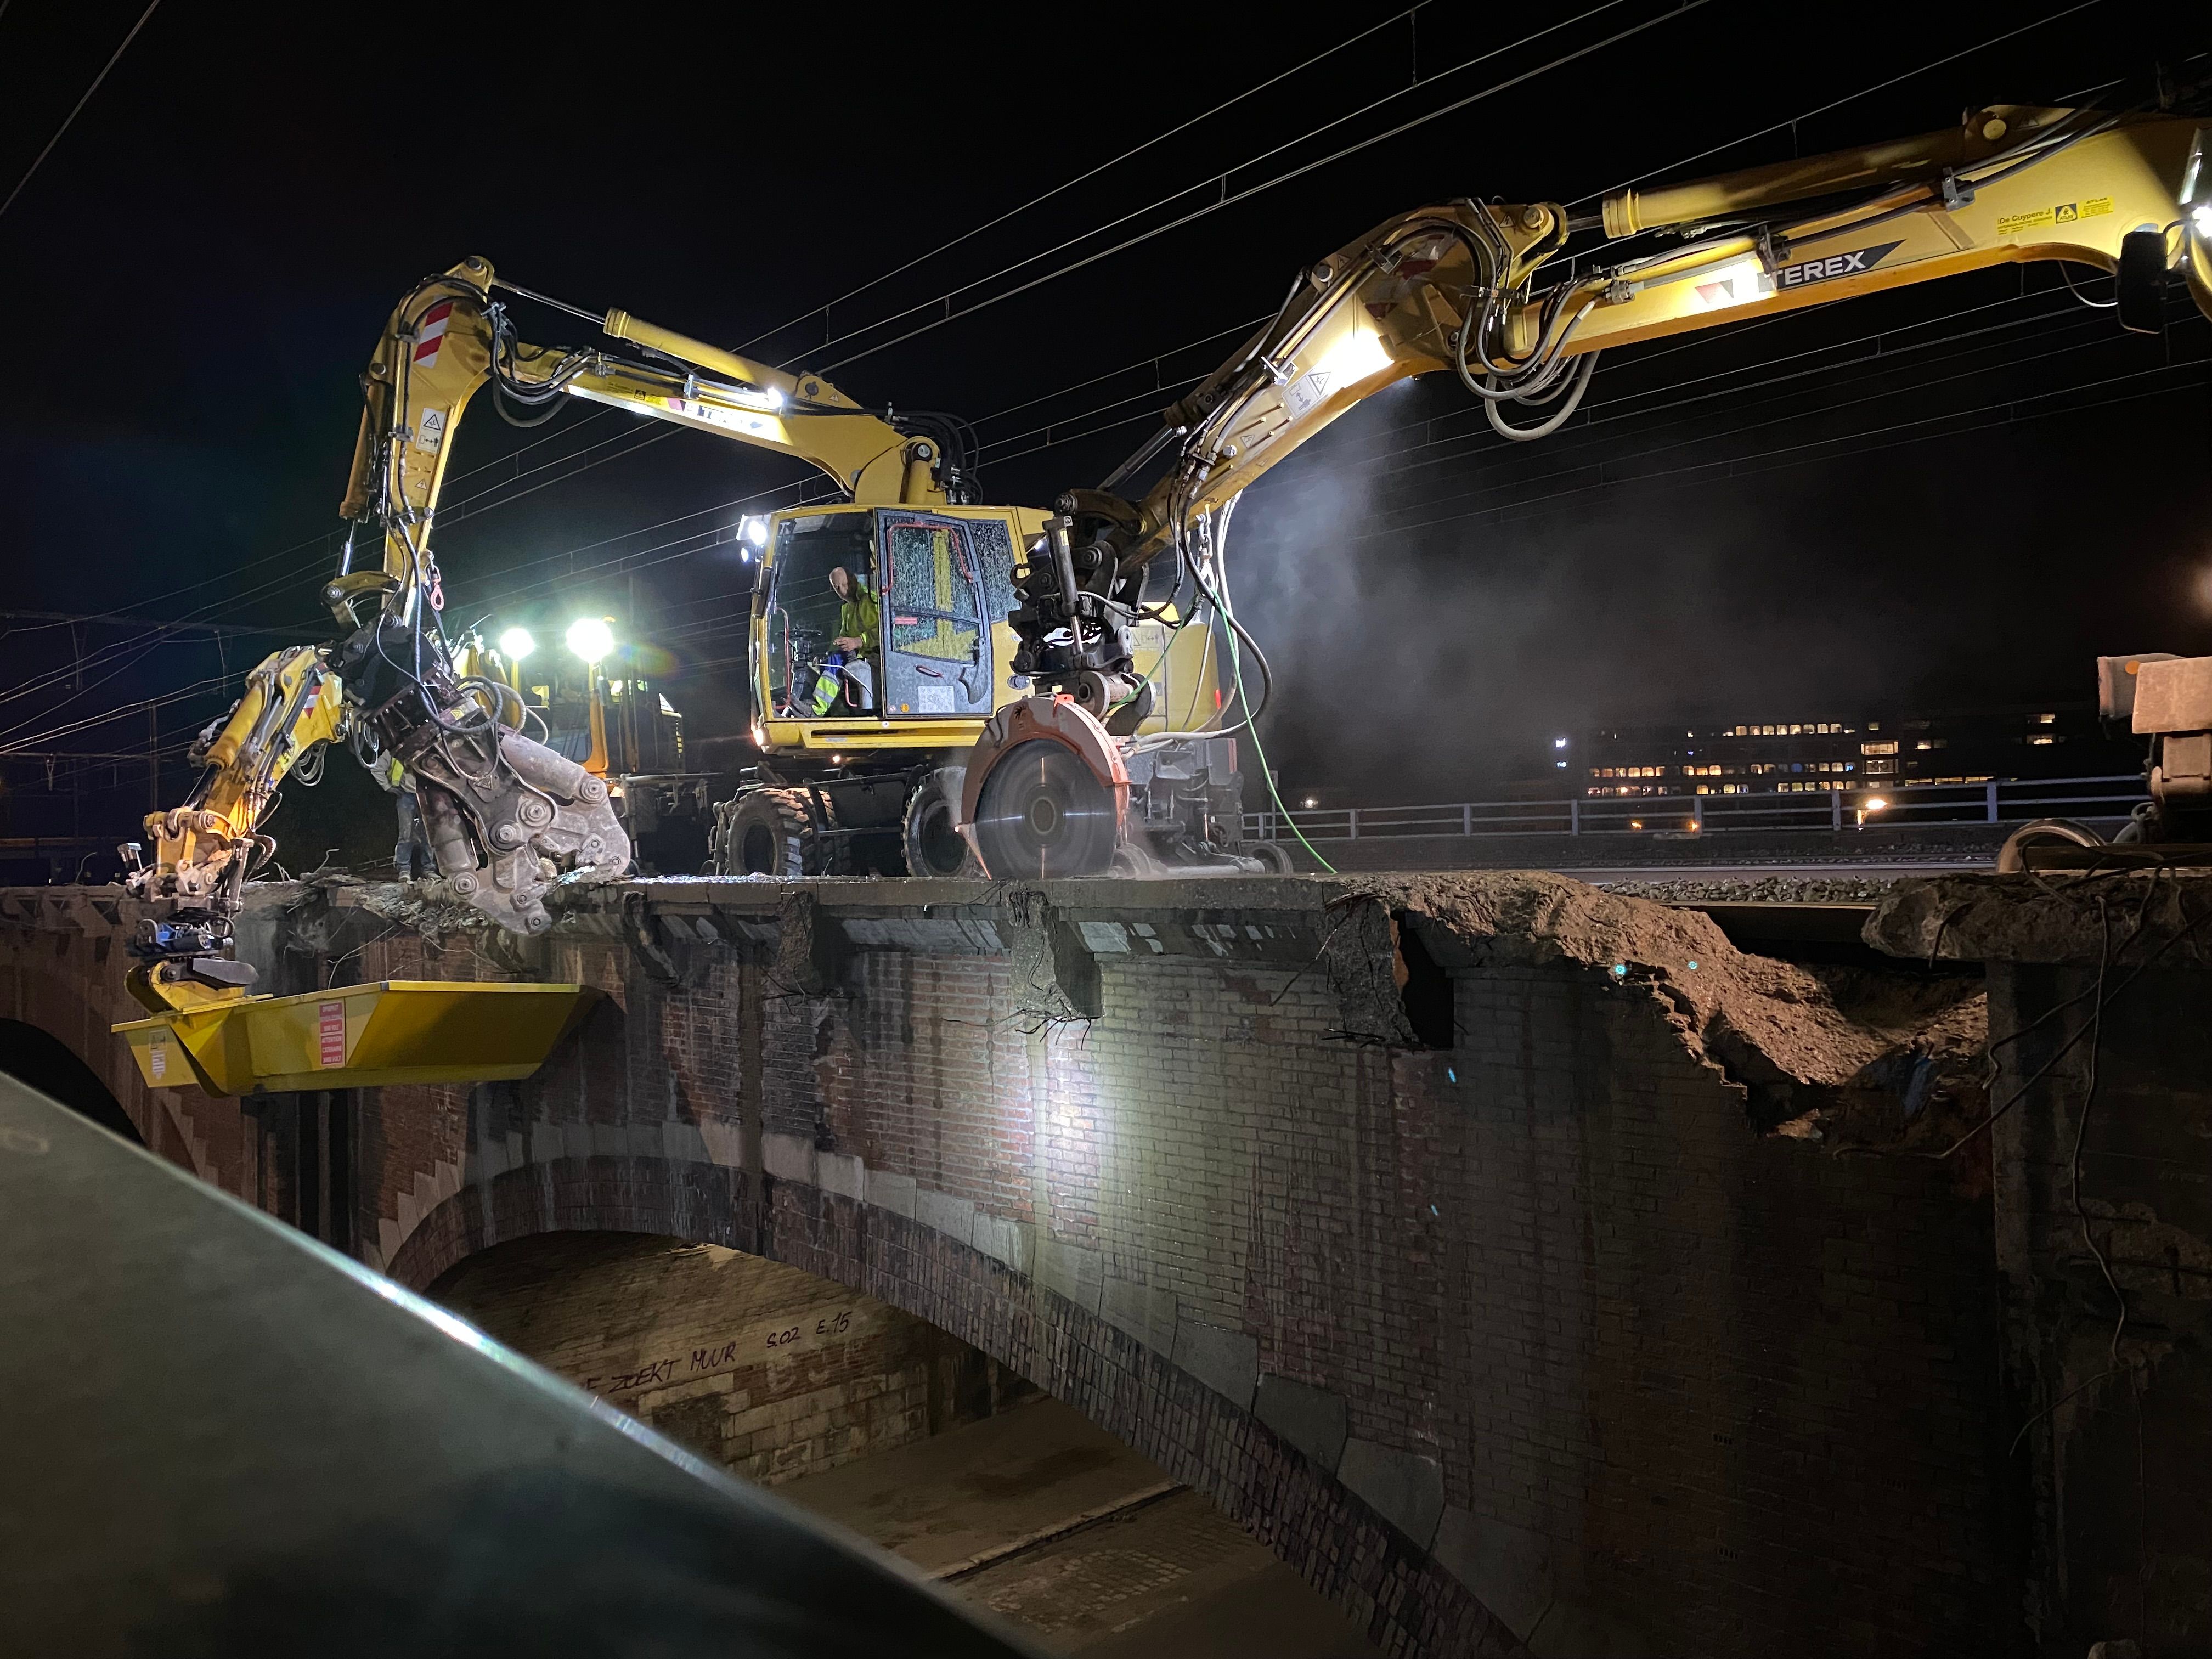 An excavator-mounted Echidna rocksaw being used to cut a bridge